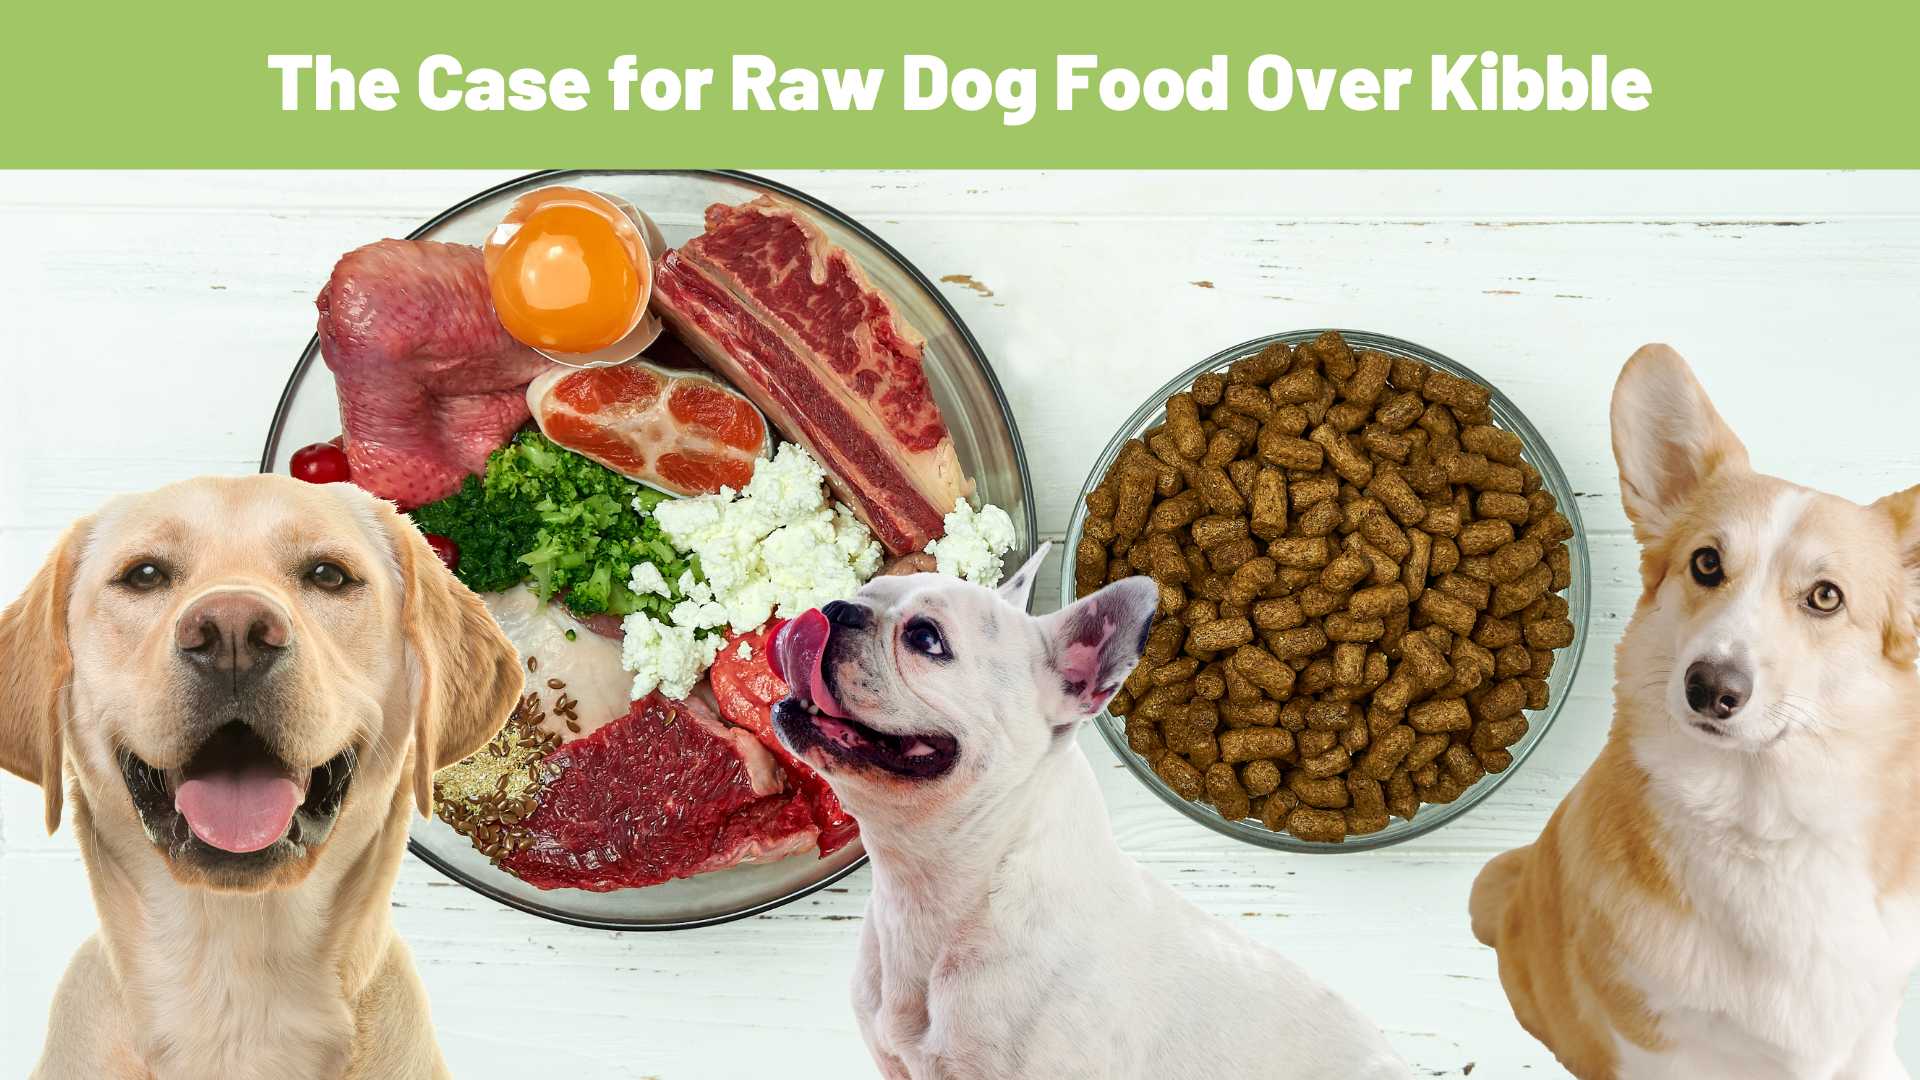 Making the Switch: The Case for Raw Dog Food Over Kibble